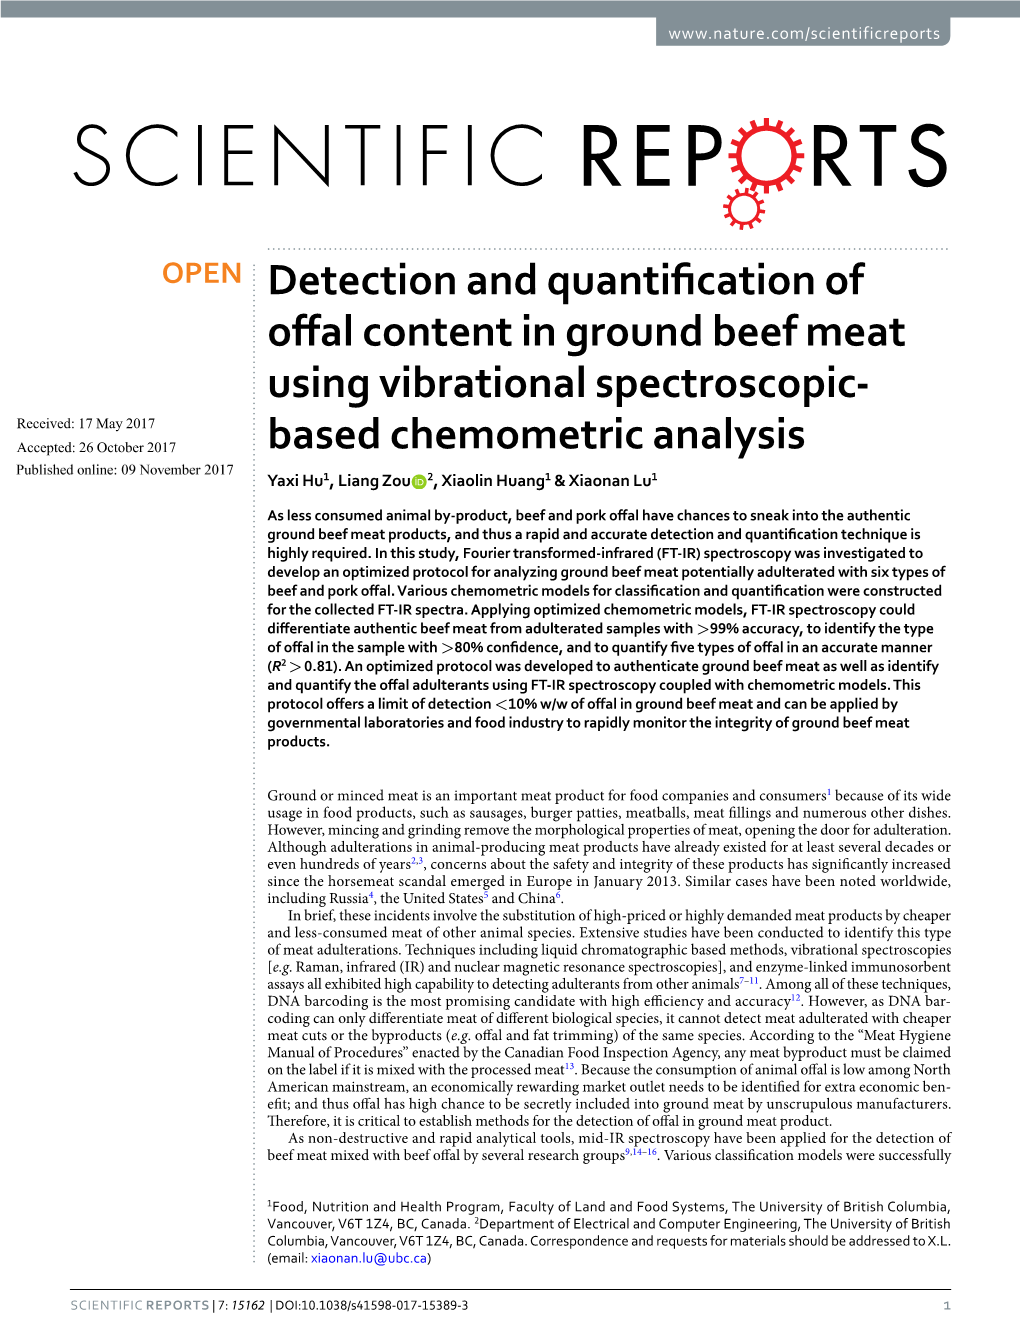 Detection and Quantification of Offal Content in Ground Beef Meat Using